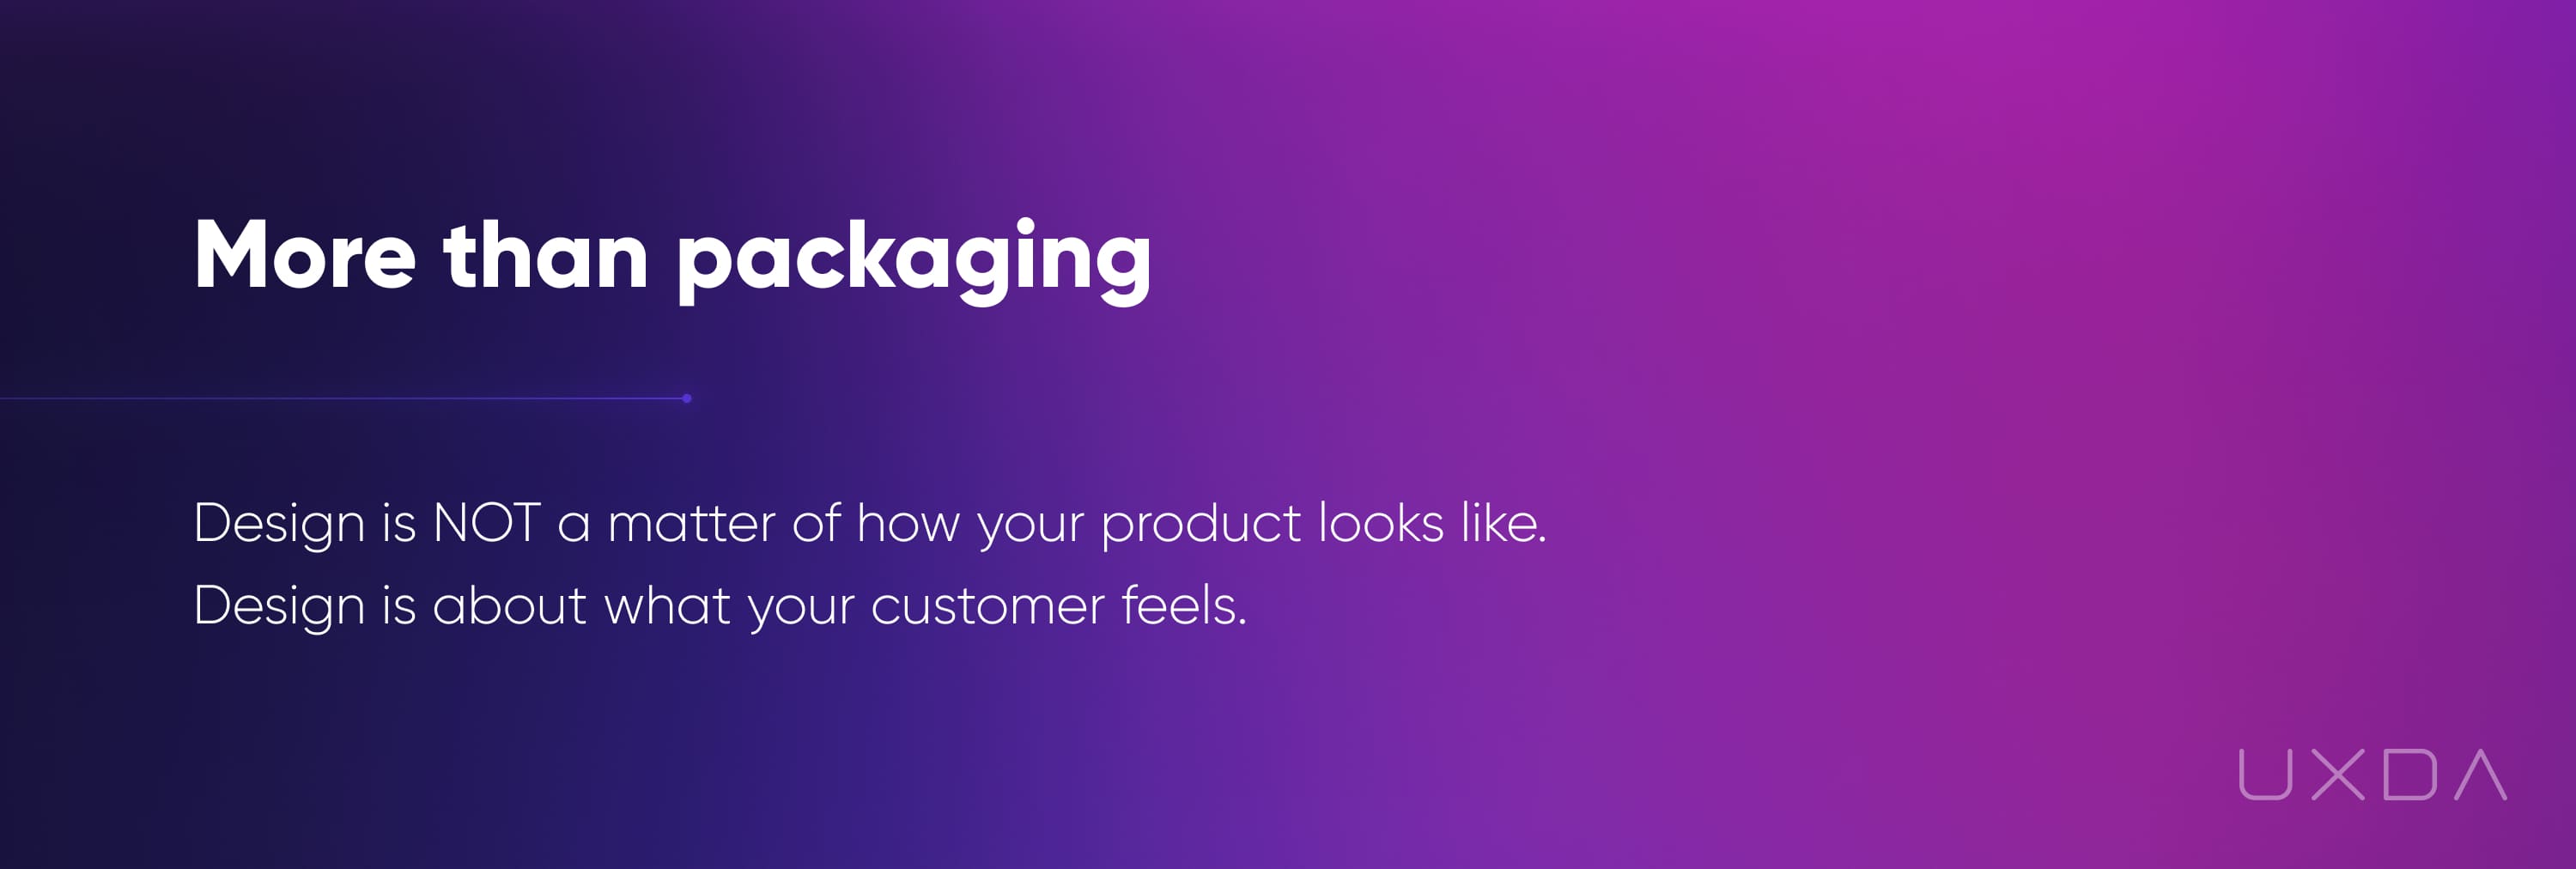 UXDA Banking User Experience Checklist Winning Strategies UX more than packaging